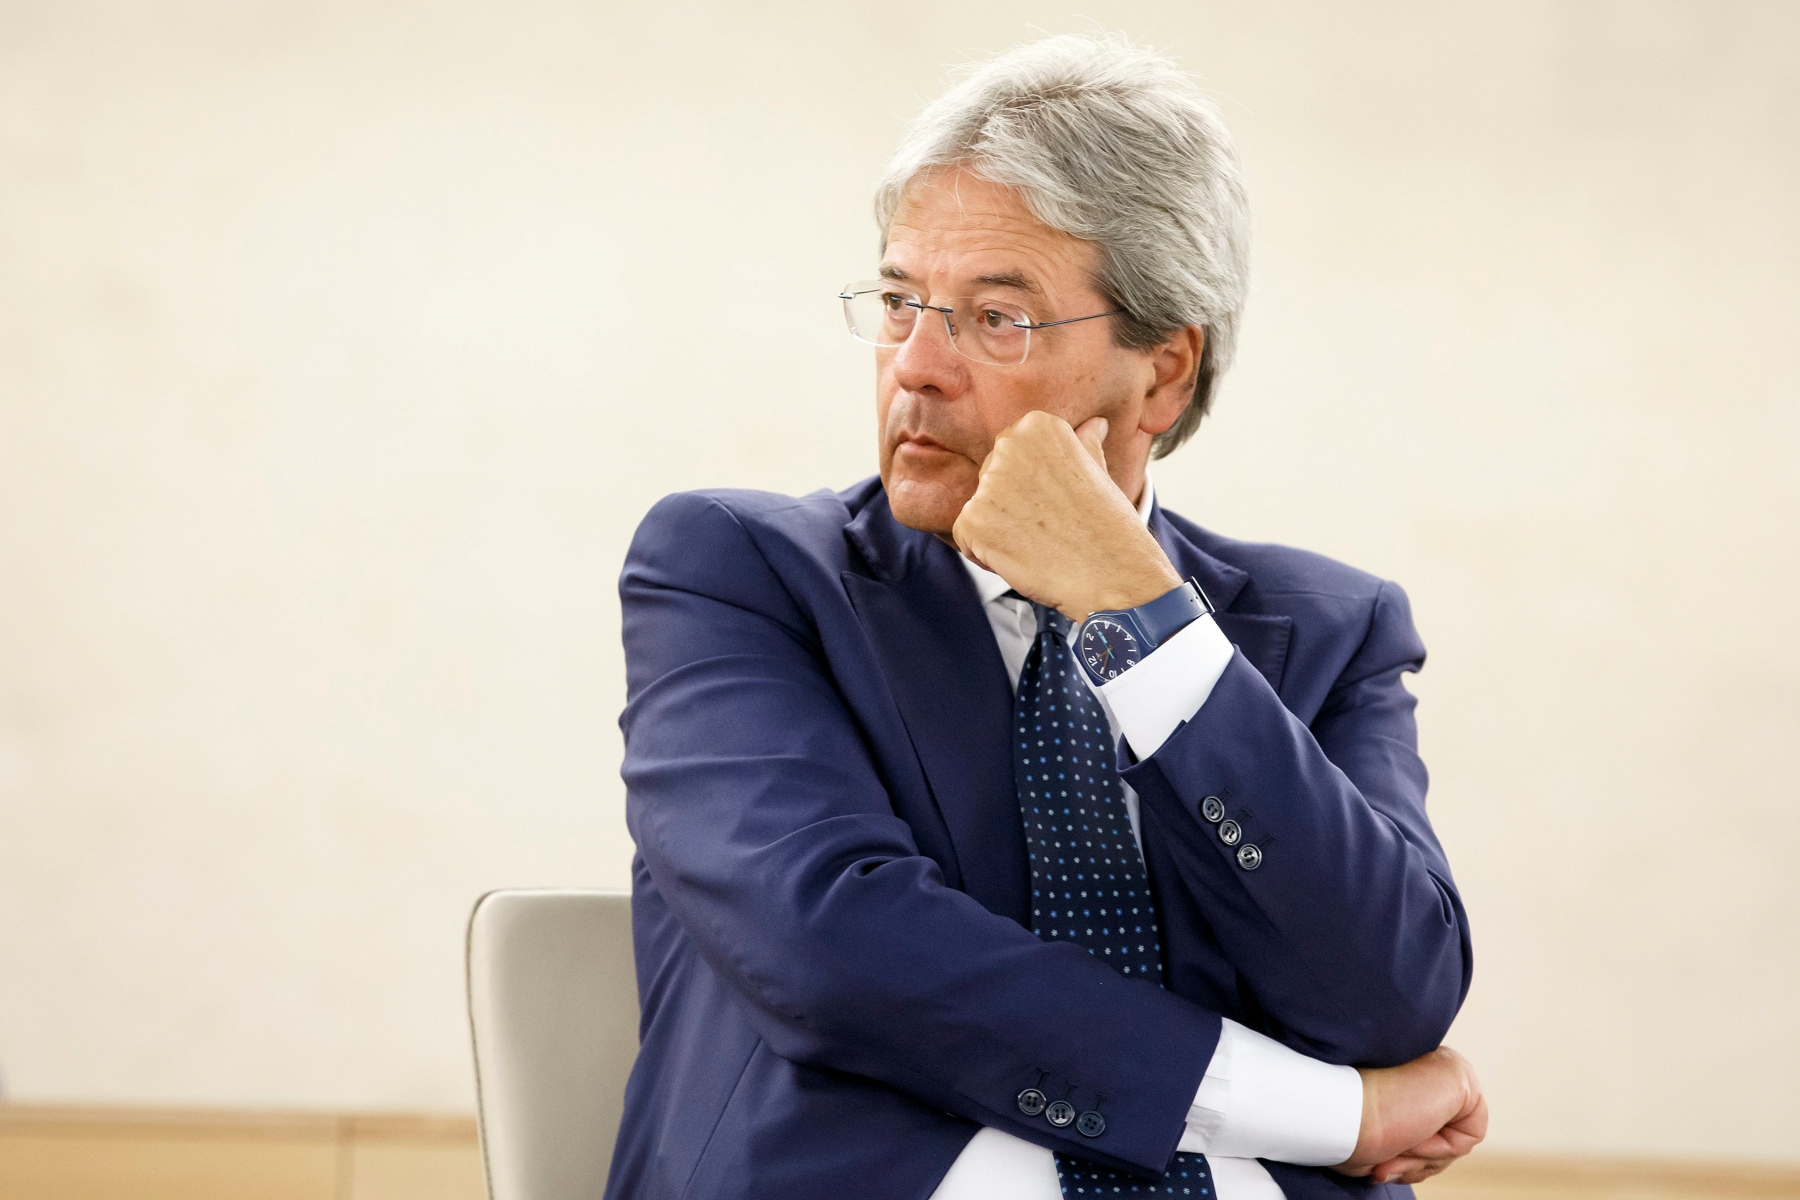 epa05670596 (FILE) A file picture dated 22 August 2016 shows Italy's Minister for Foreign Affairs Paolo Gentiloni during the Conference of Ambassadors and Foreign Service of Switzerland, at the European headquarters of the United Nation in Geneva, Switzerland. According to news reports on 11 December 2016, Gentiloni was appointed new Italian Prime Minister after Matteo Renzi had resigned following a referendum.  EPA/SALVATORE DI NOLFI FILE SWITZERLAND ITALY GENTILONI PRIME MINISTER